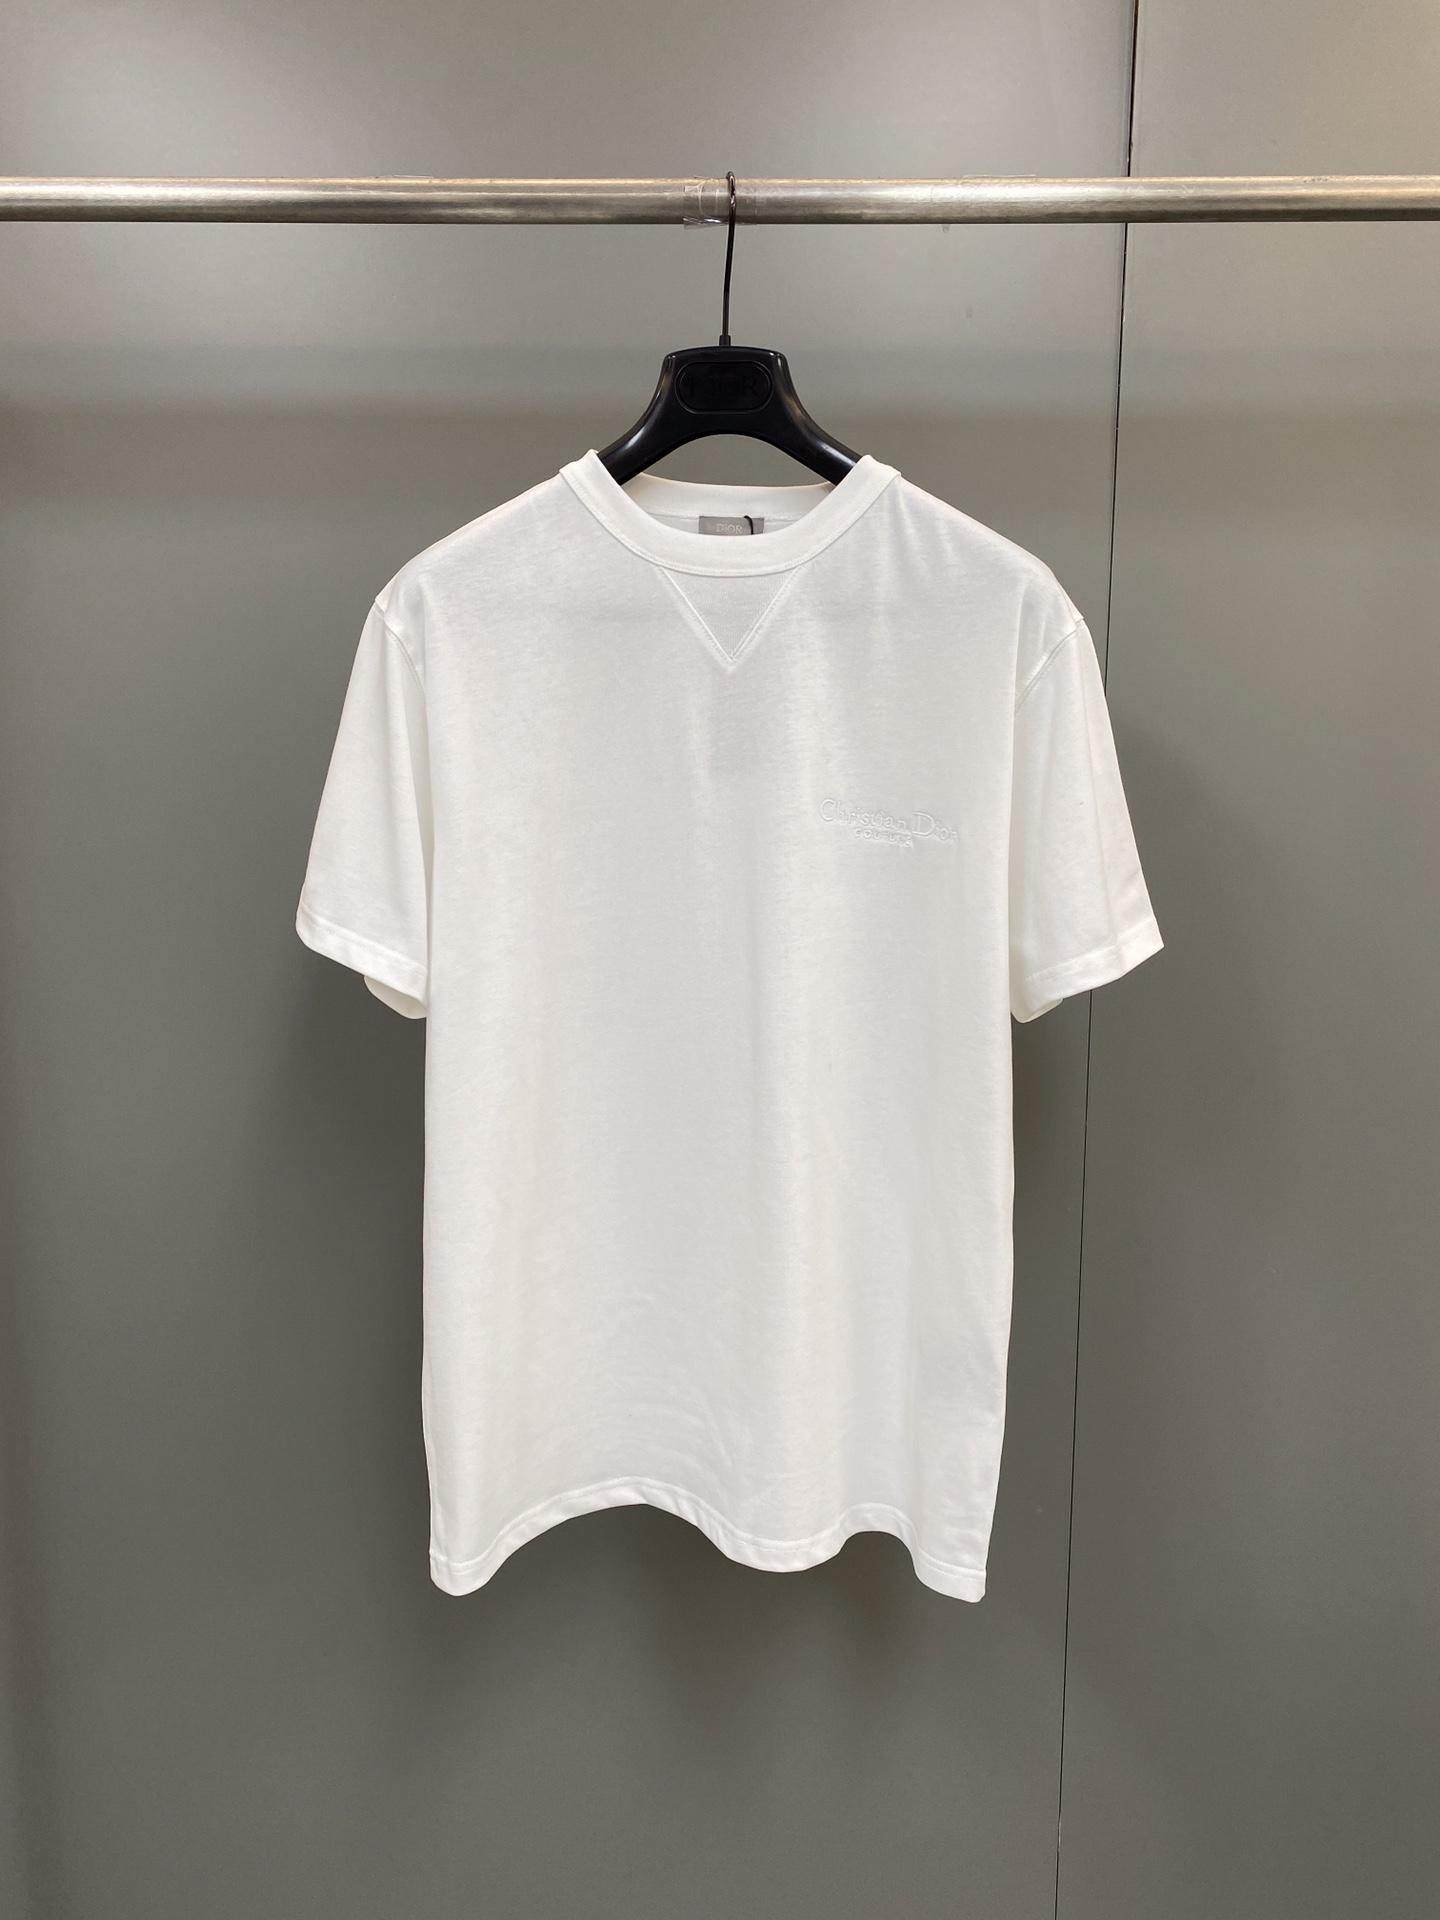 christian-dior-couture-t-shirt-relaxed-fit-5660_16845009642-1000